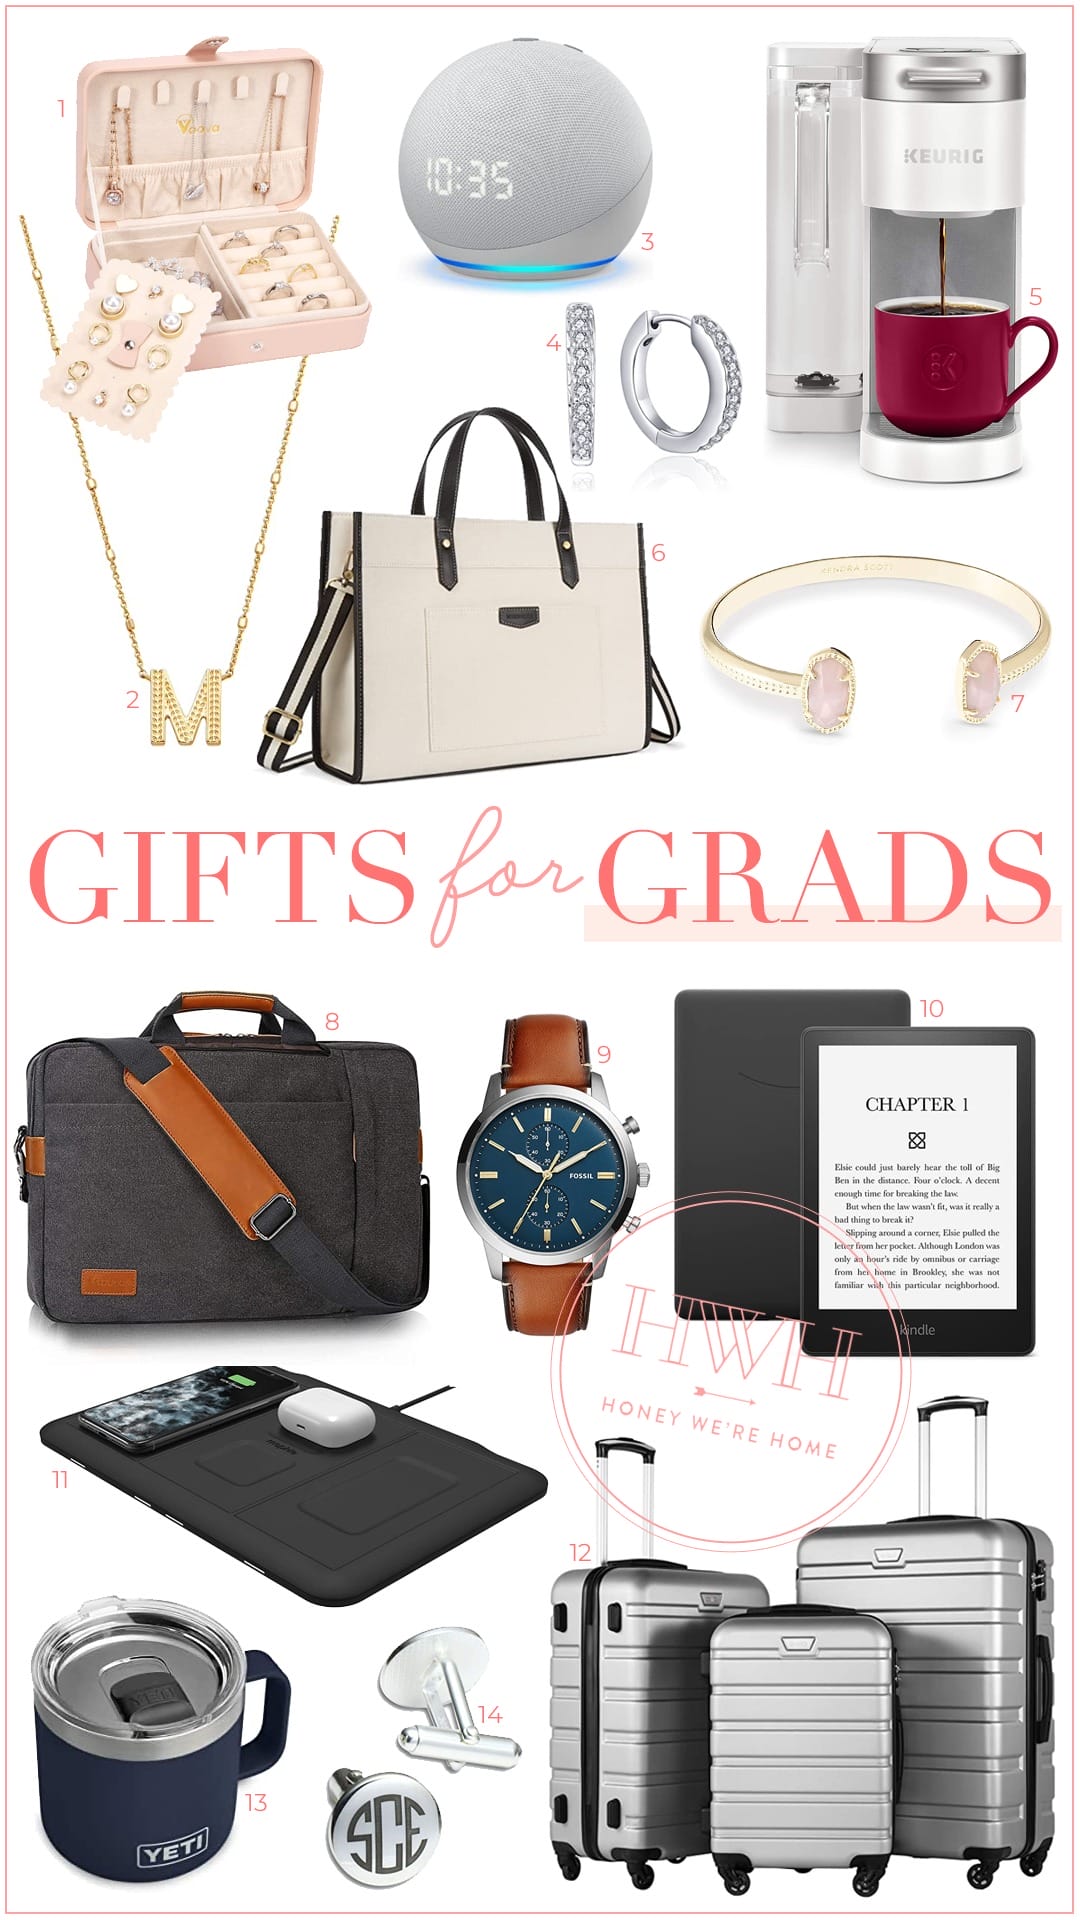 Gifts for Grads | All on Prime